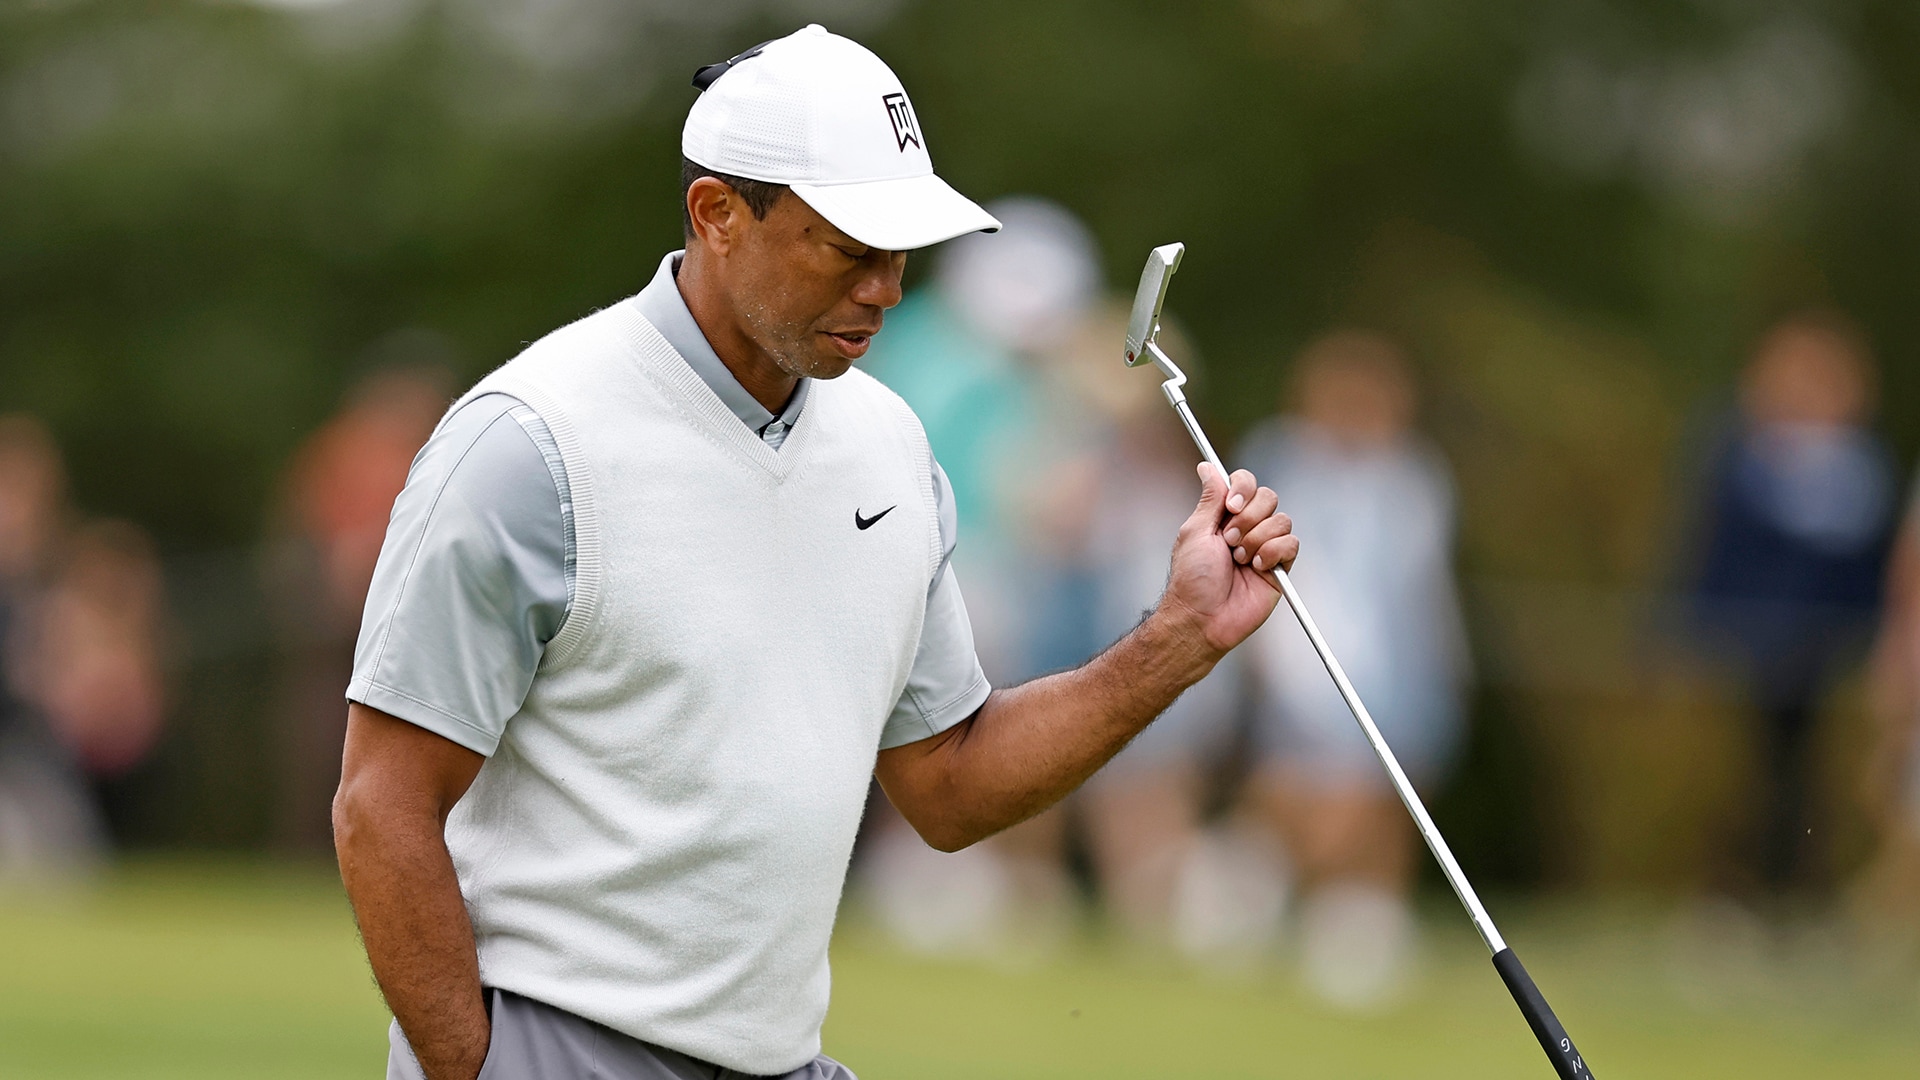 Tiger Woods highlights: Going low Saturday at Riviera, nearly cards albatross